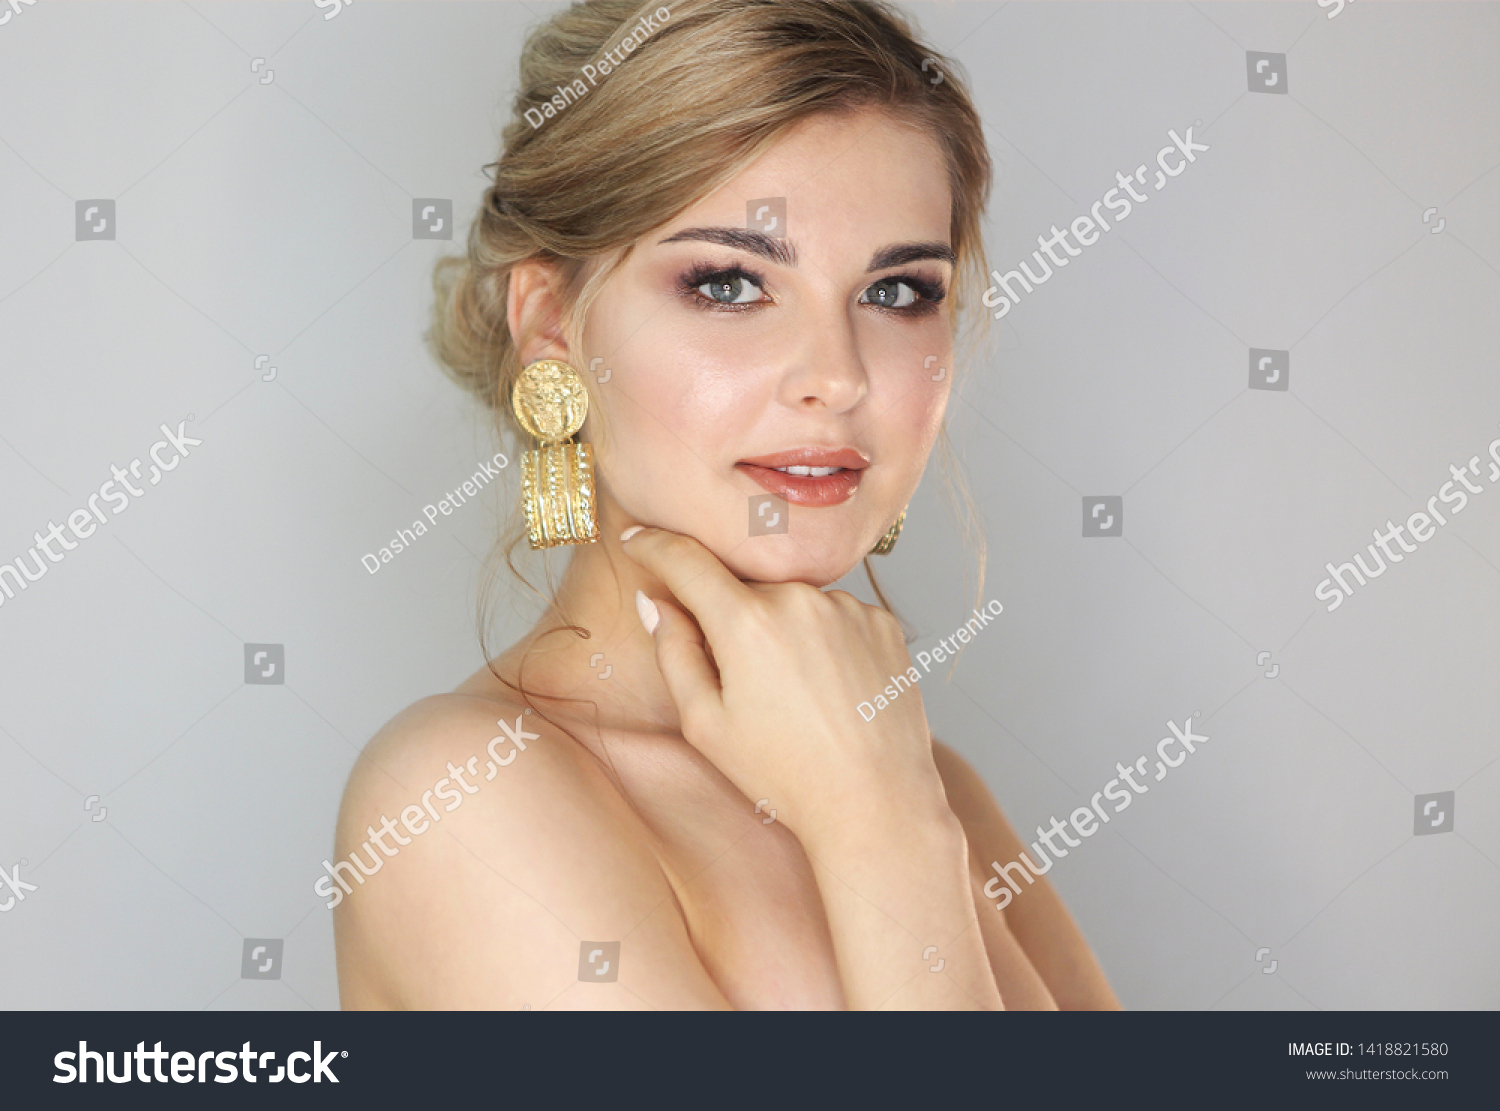 Portrait of the blond woman with fashion hairstyle and makeup wearing big golden earrings #1418821580